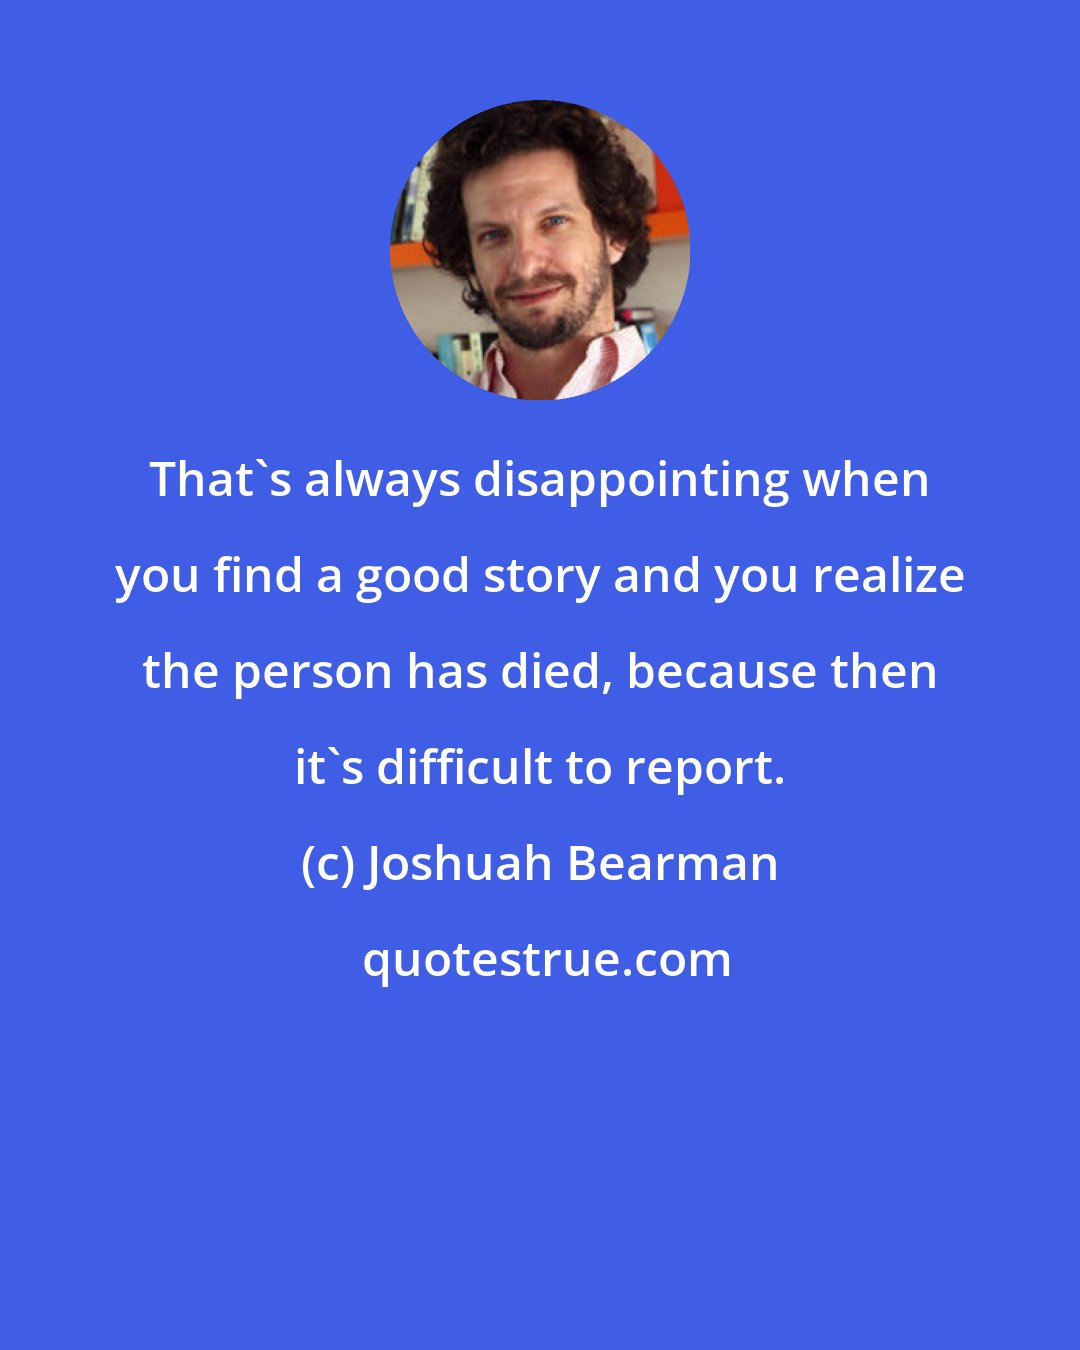 Joshuah Bearman: That's always disappointing when you find a good story and you realize the person has died, because then it's difficult to report.